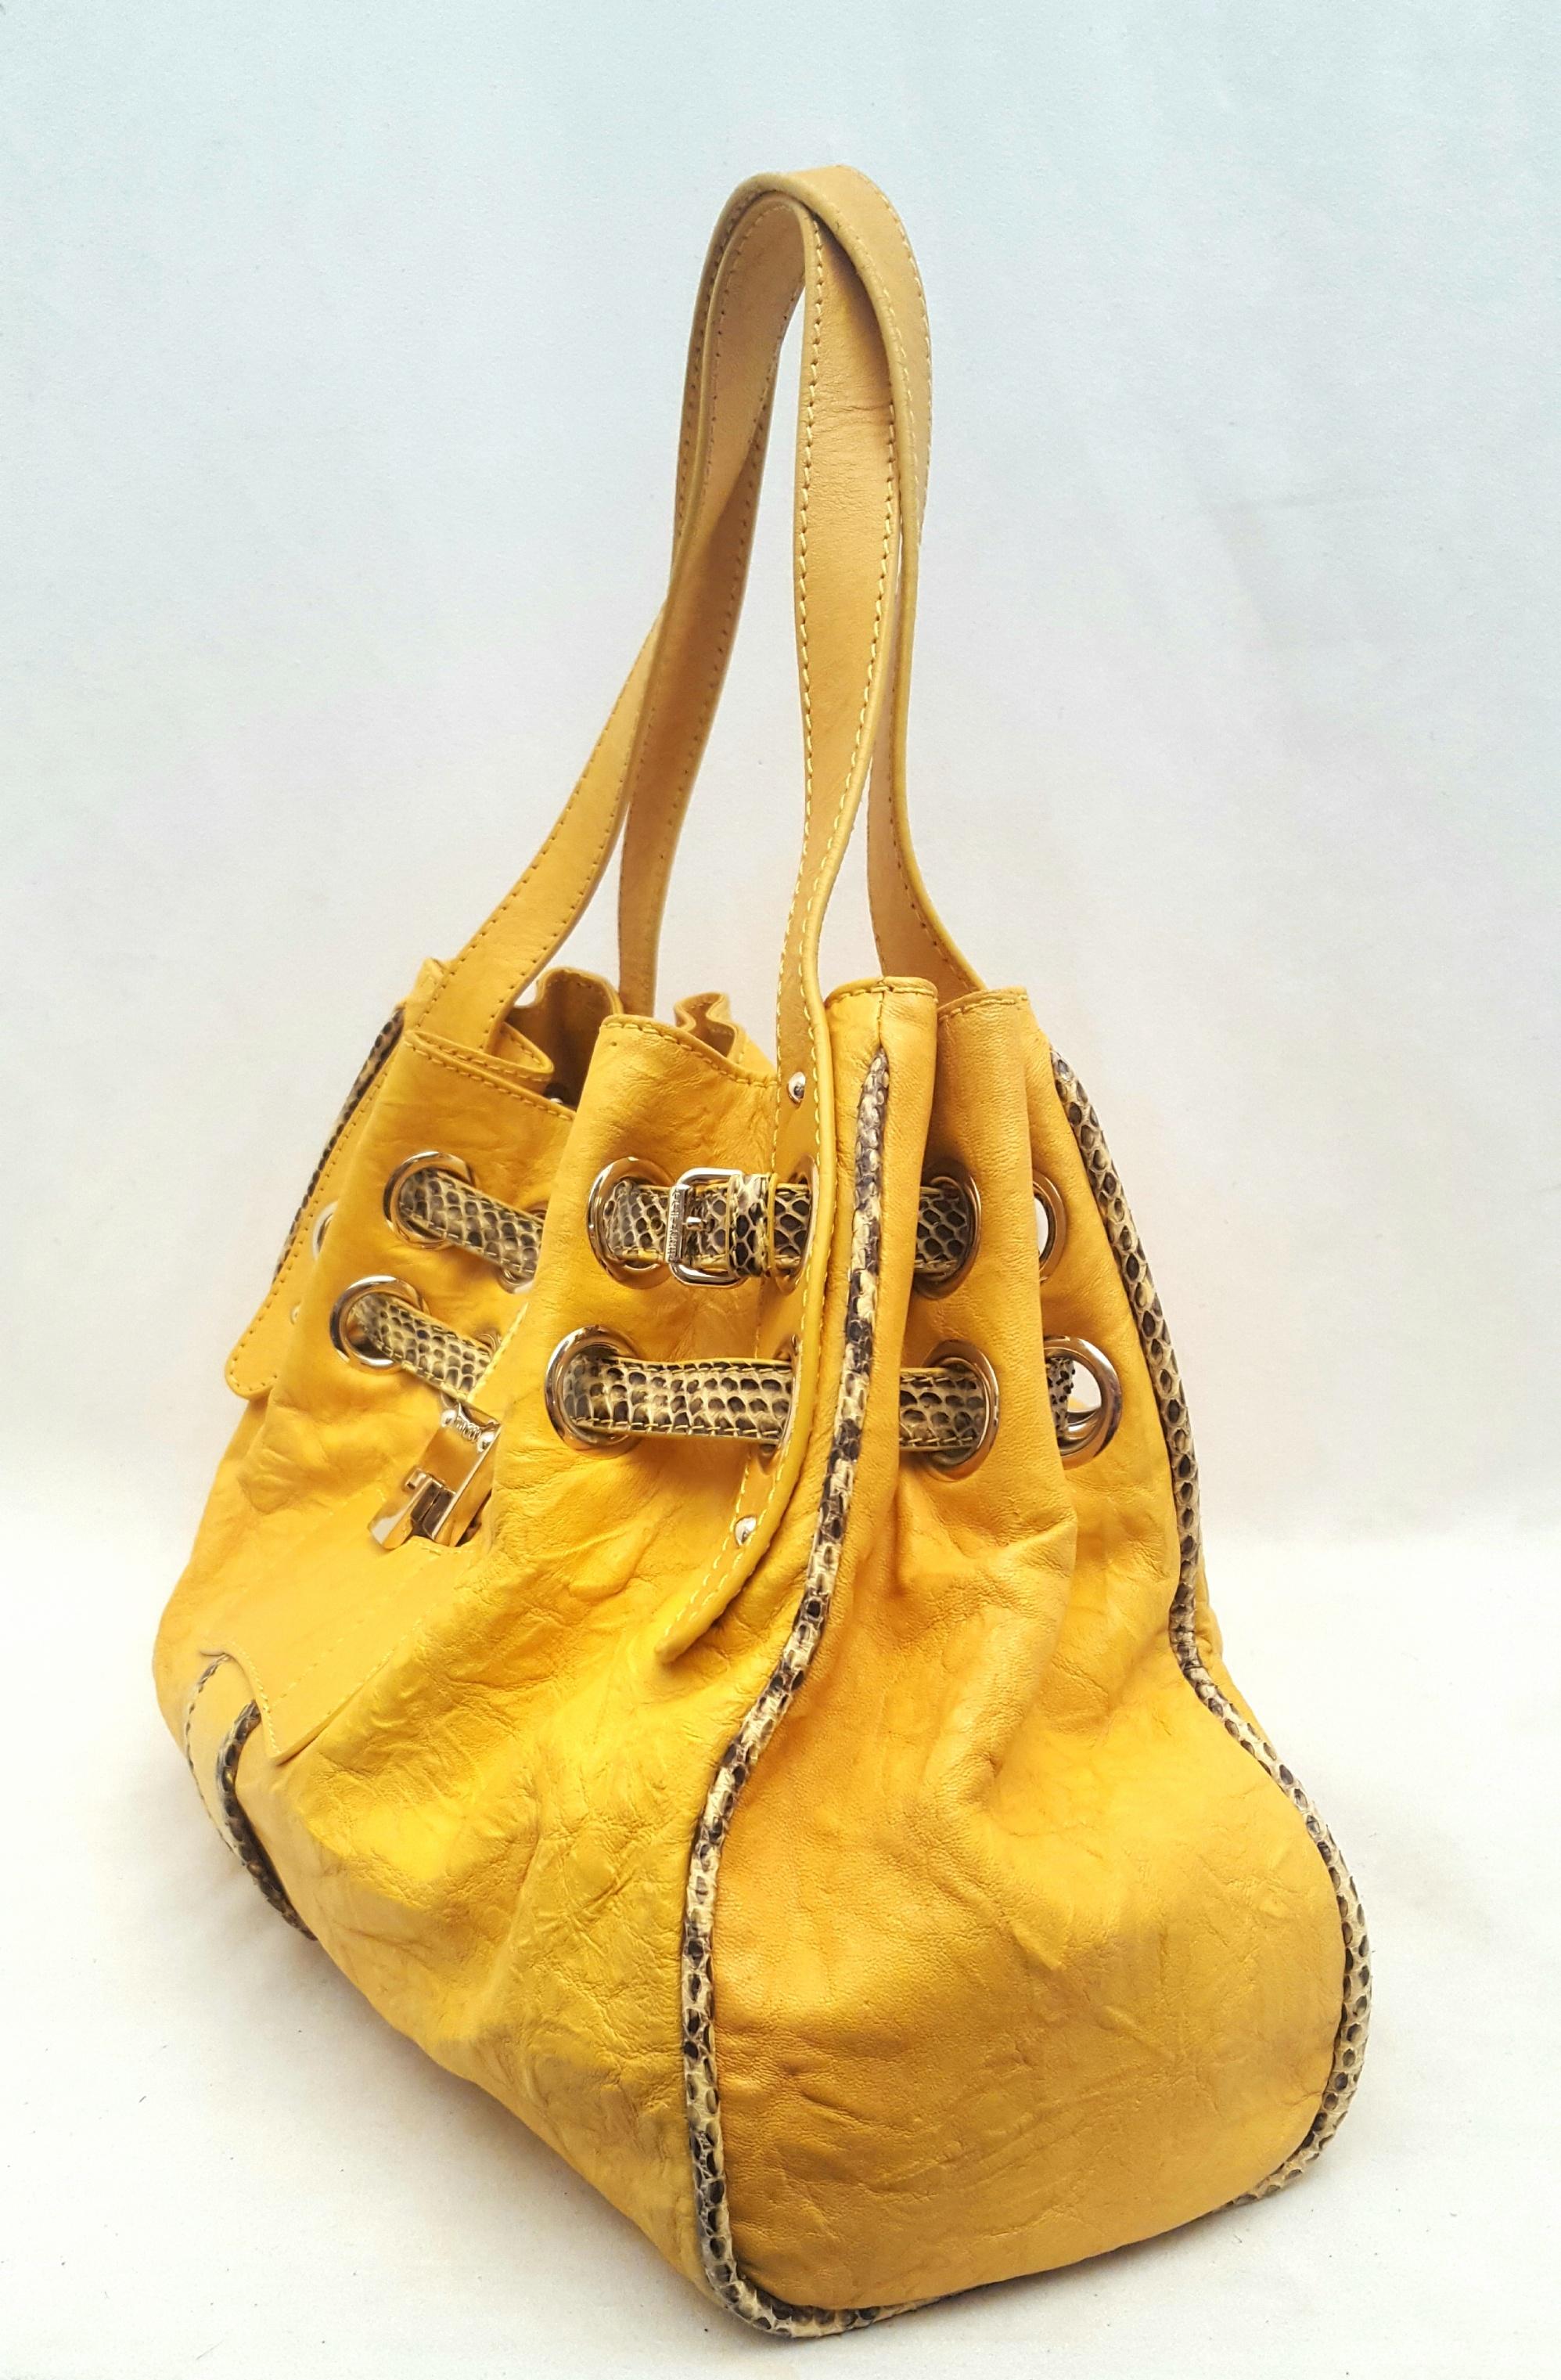 Jimmy Choo yellow leather Riki bag with brown and ivory authentic snakeskin trim details creates with the gold tone grommets a drawstring design around the top of bag.  The main center pocket is lined in tan micro suede that includes four interior